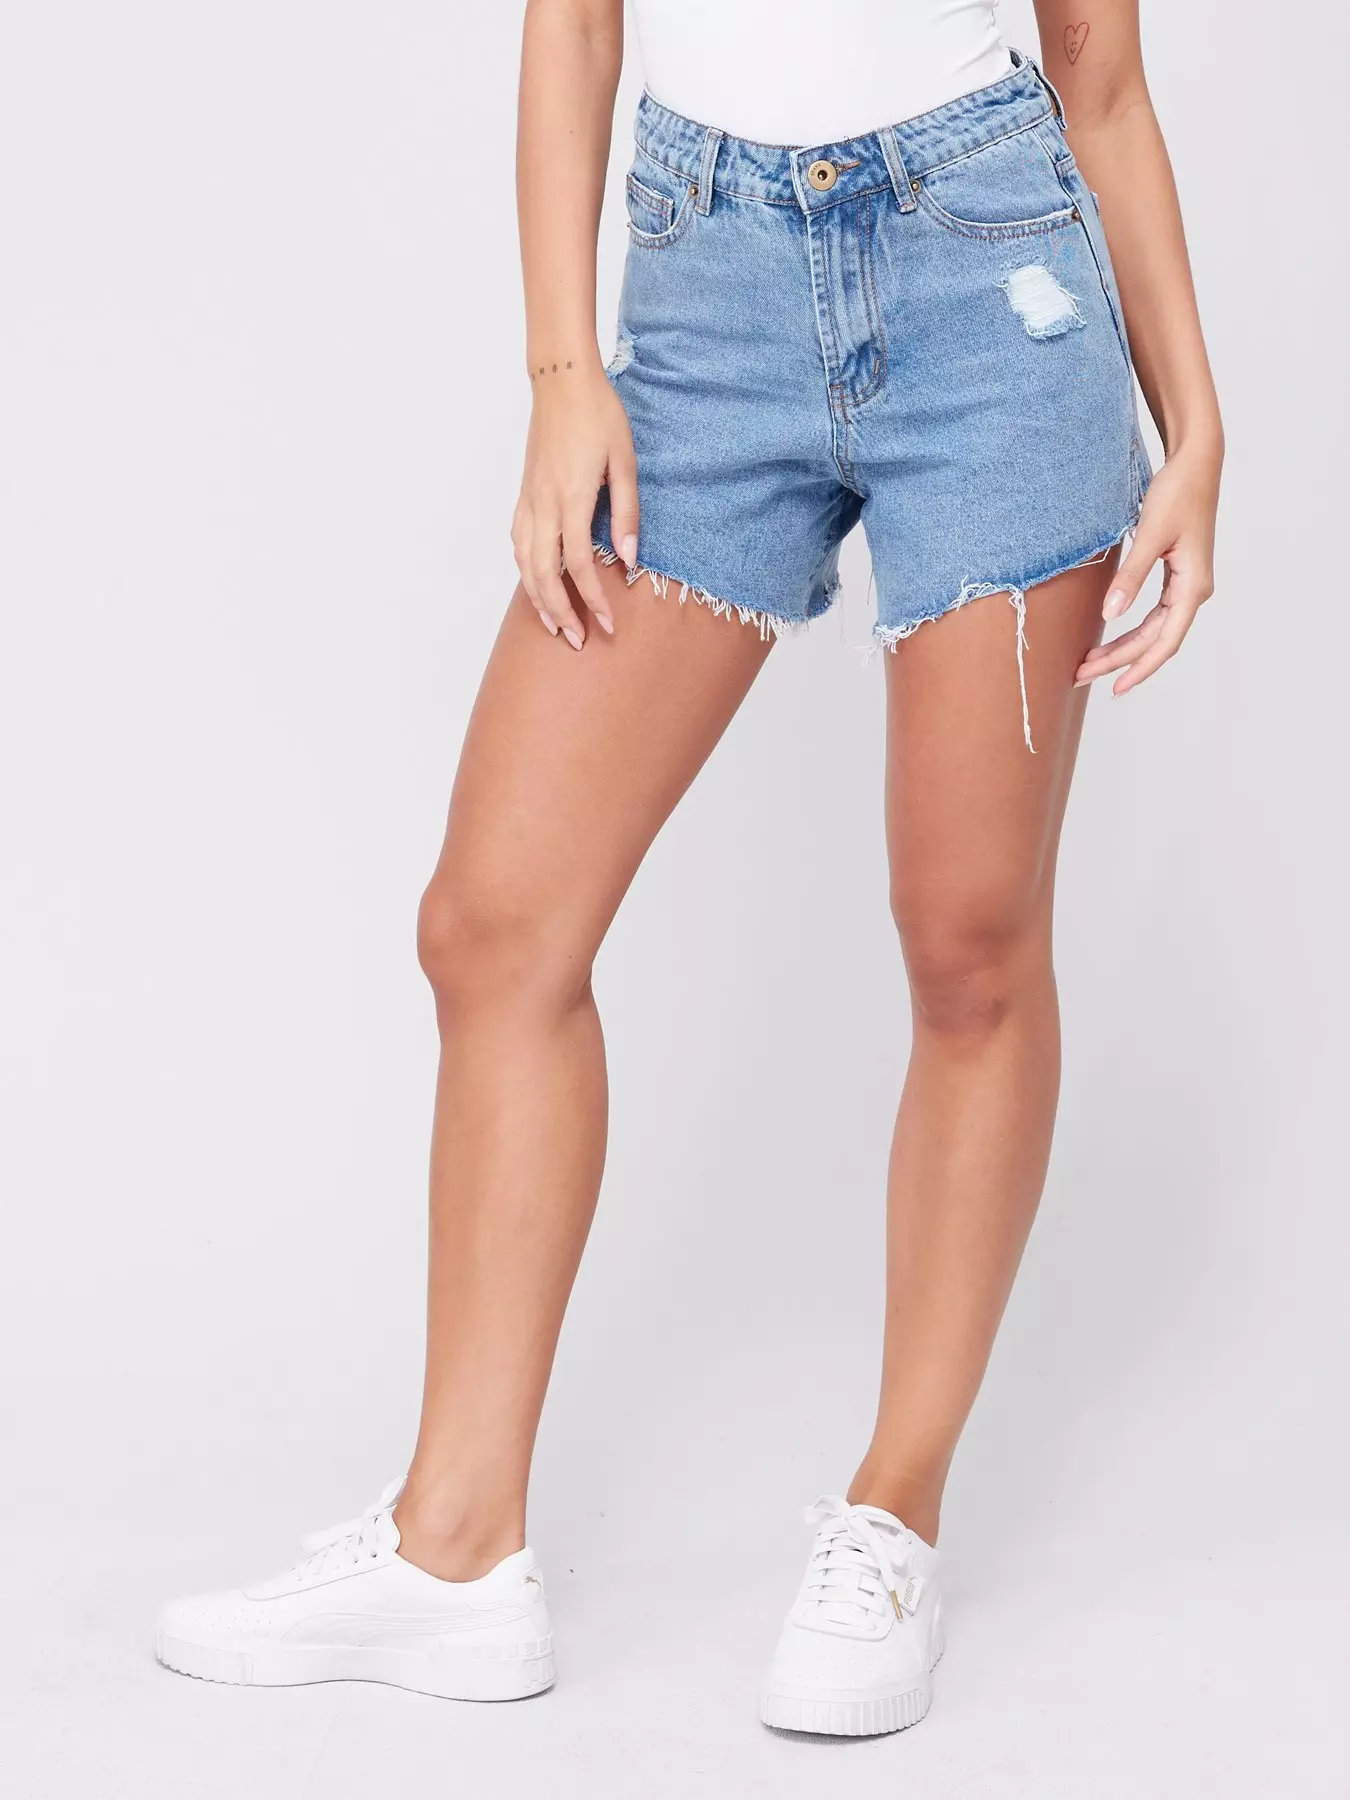 Summer Cotton National Flag Ripped Jeans Shorts Womens For Women